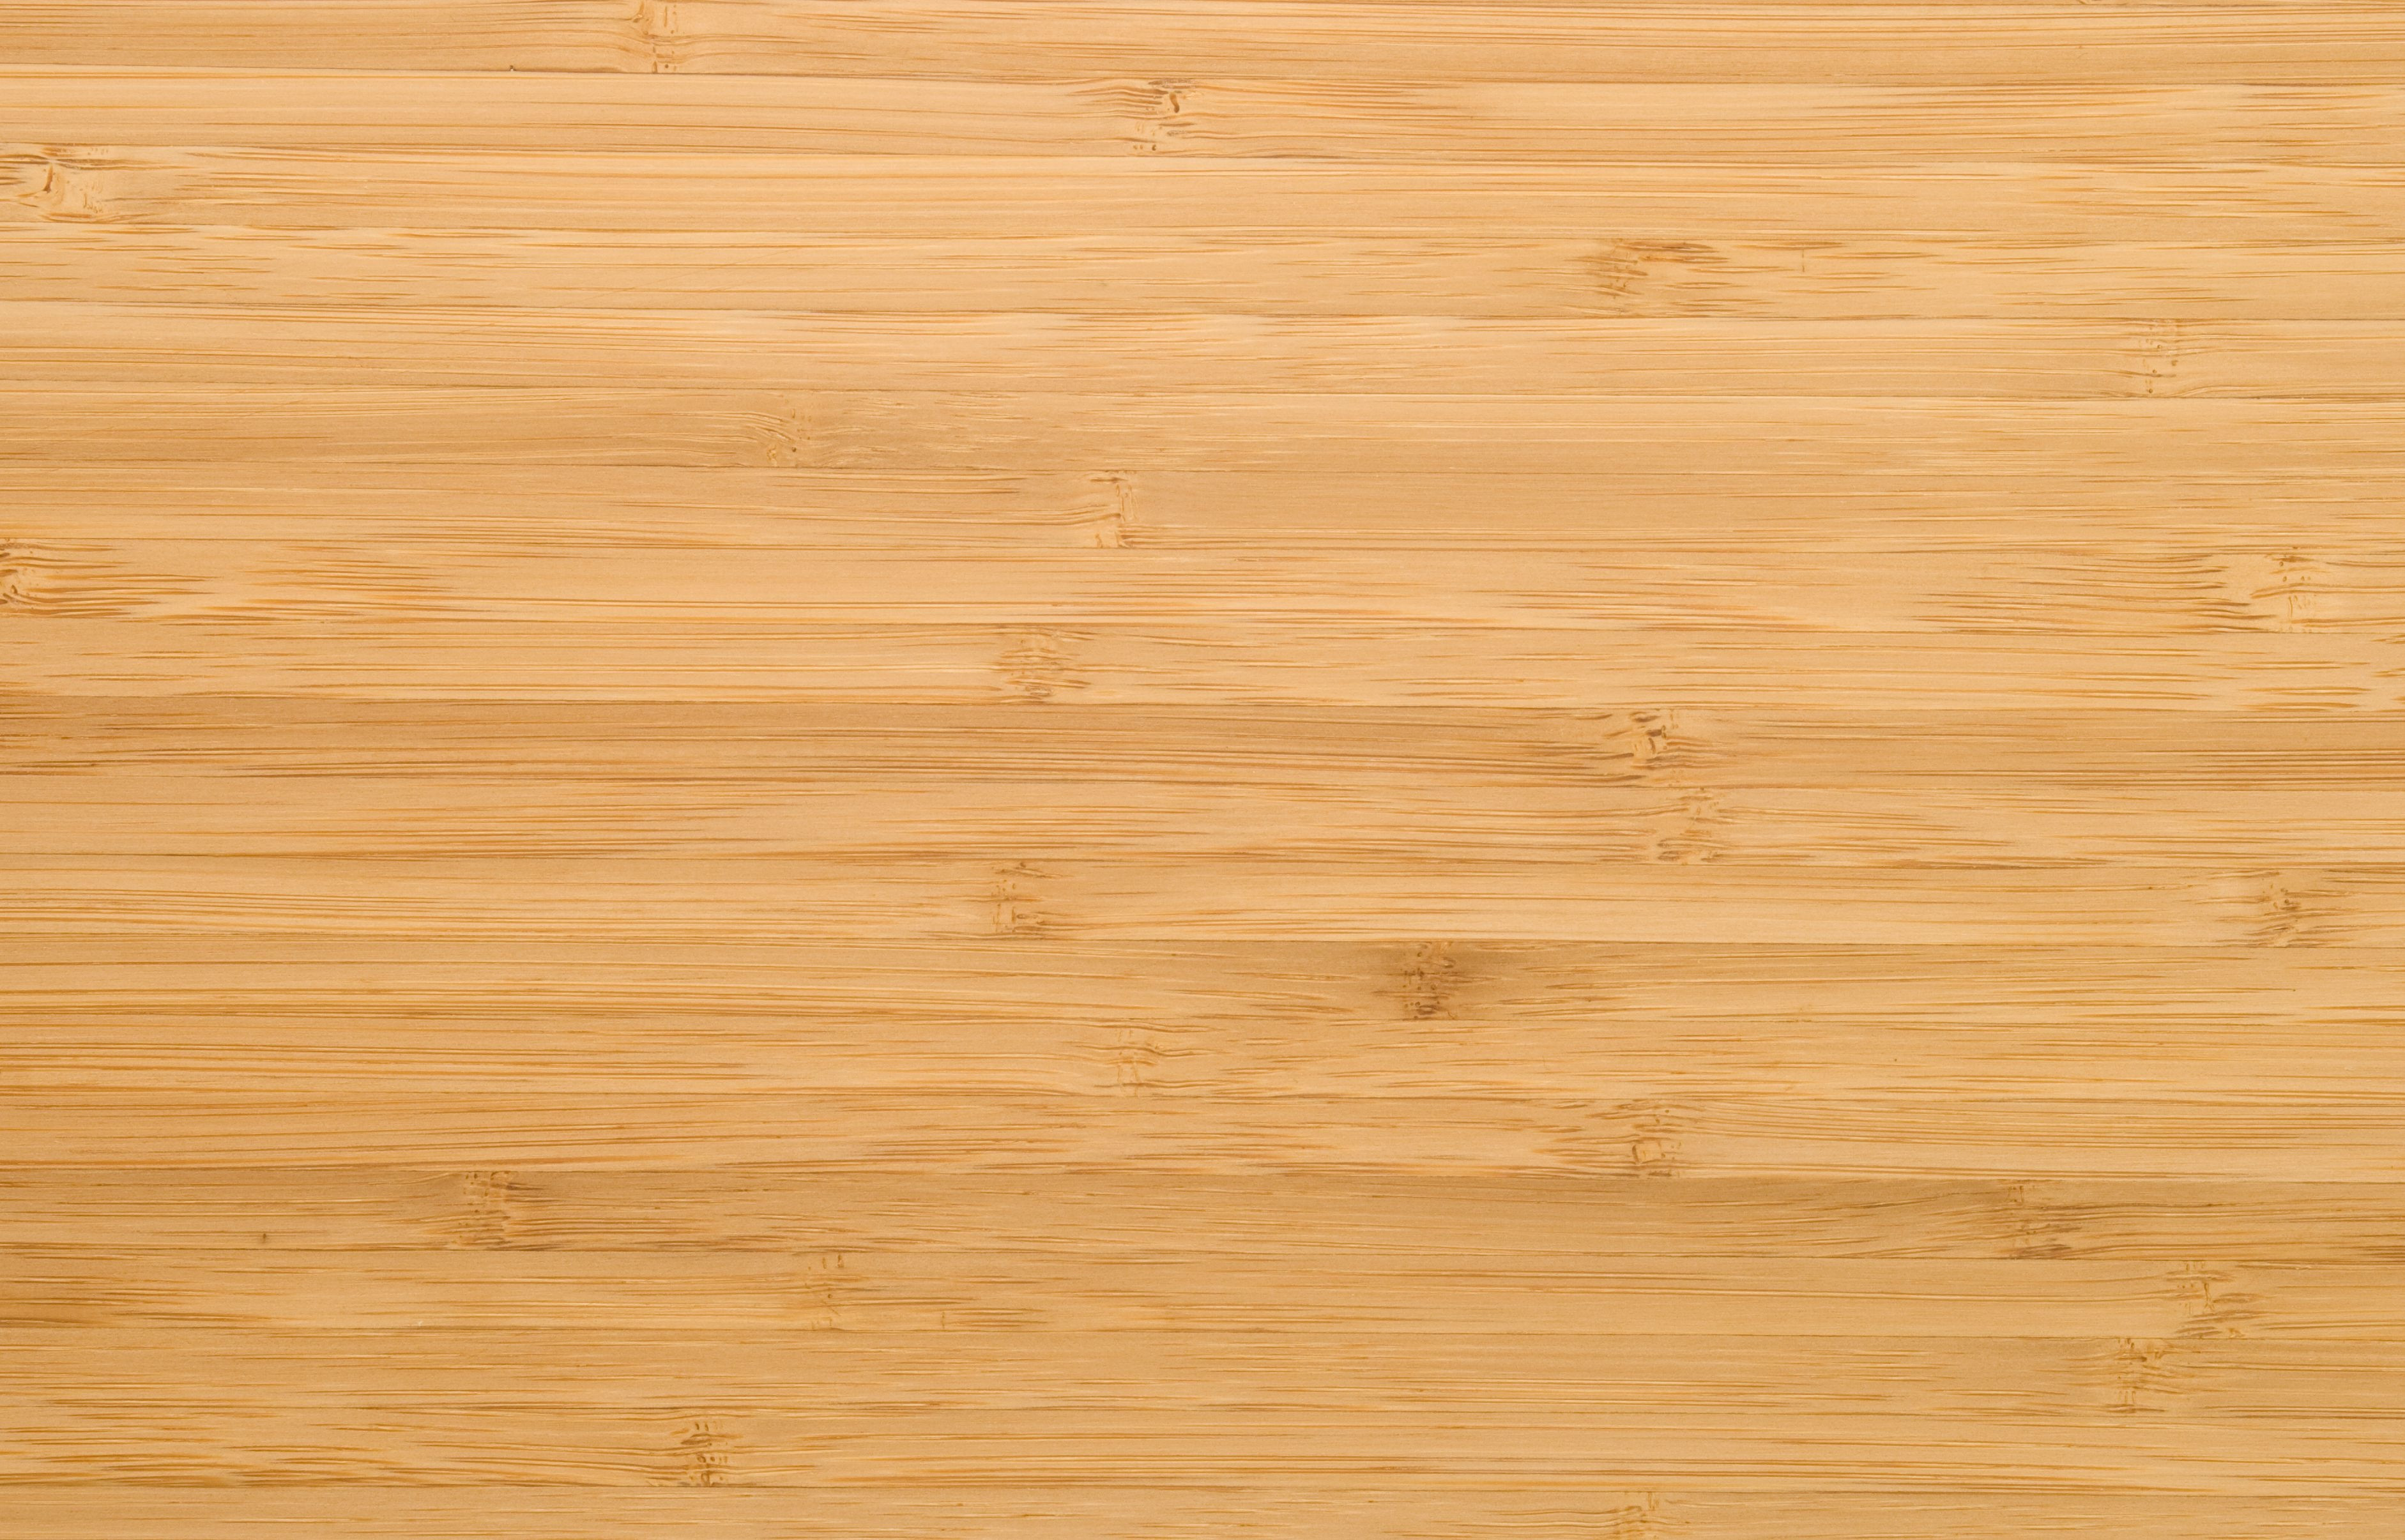 mahogany hardwood flooring prices of 31 unique bamboo vs hardwood flooring photograph flooring design ideas regarding bamboo vs hardwood flooring luxury cleaning and maintaining bamboo floors gallery of 31 unique bamboo vs